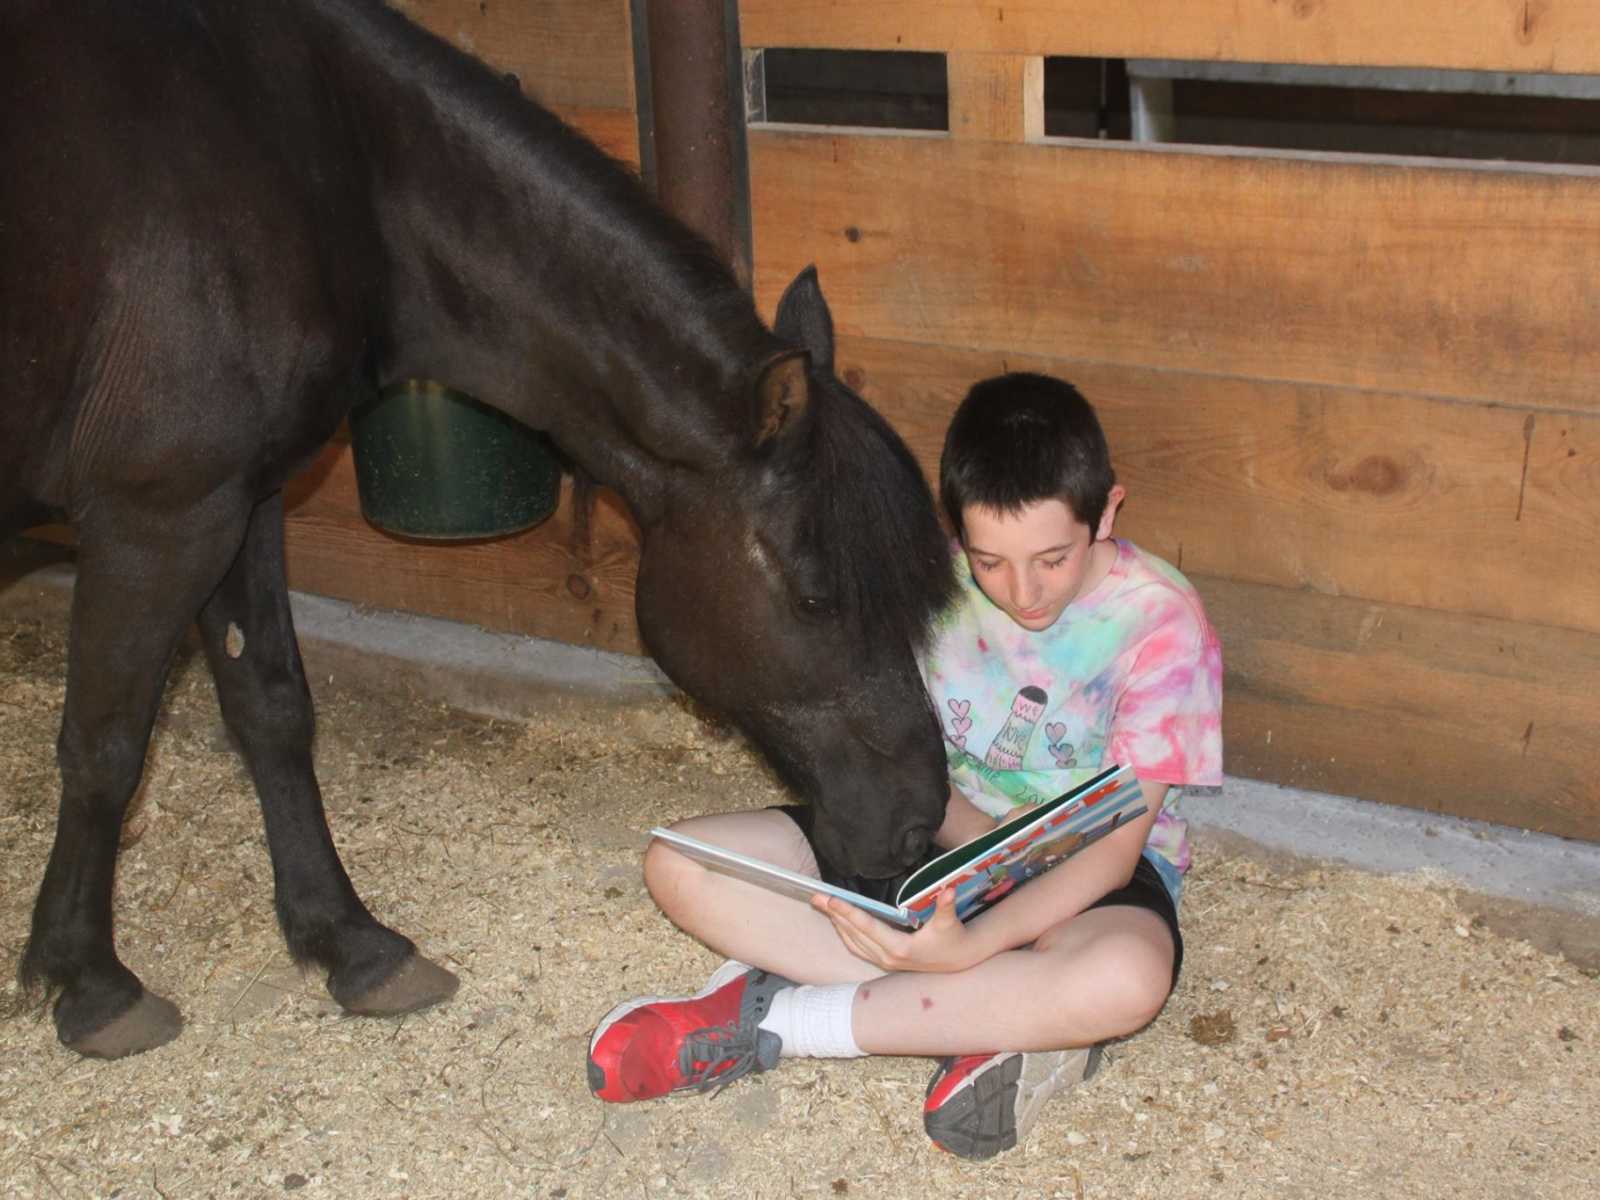 young boy sitting on ground of horse stall reading a book while horse leans over him with nose on book